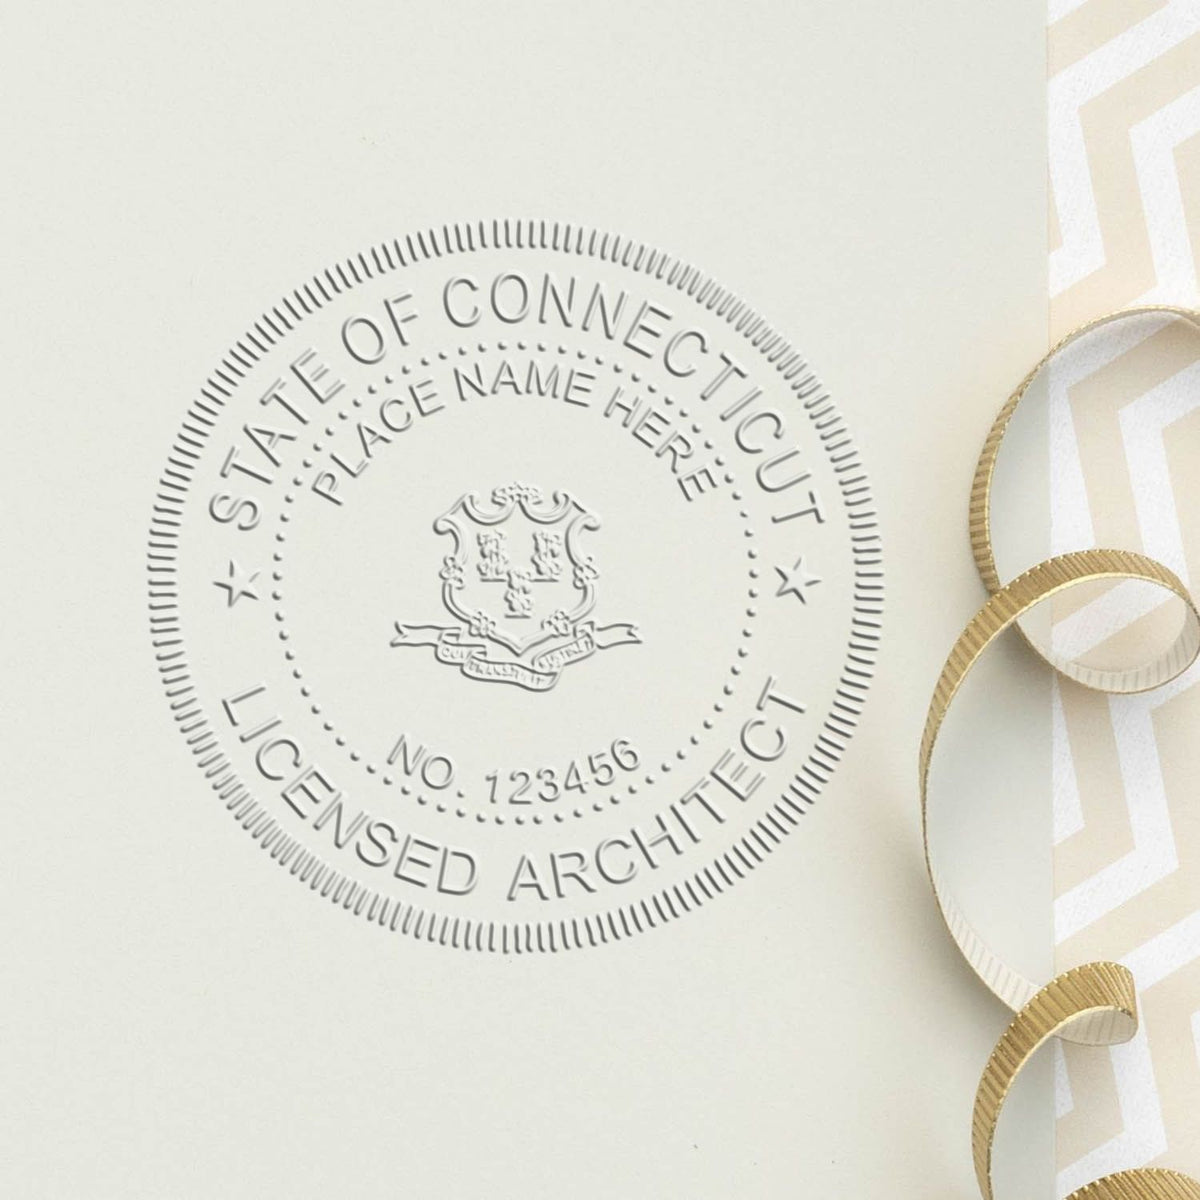 An alternative view of the State of Connecticut Long Reach Architectural Embossing Seal stamped on a sheet of paper showing the image in use